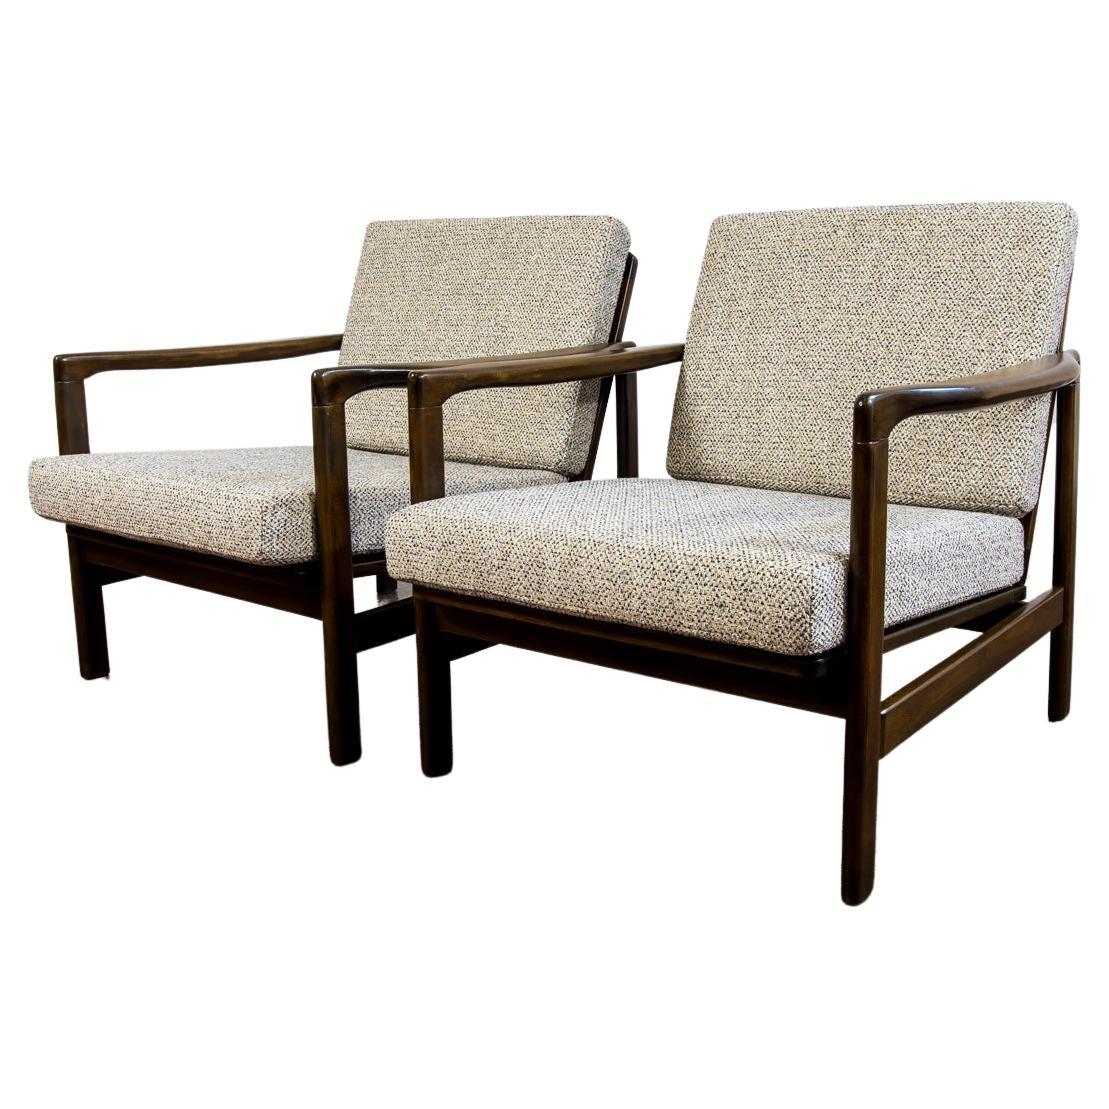 Pair of Mid-Century Vintage B7522 Lounge Chairs by Zenon Bączyk, 1960's